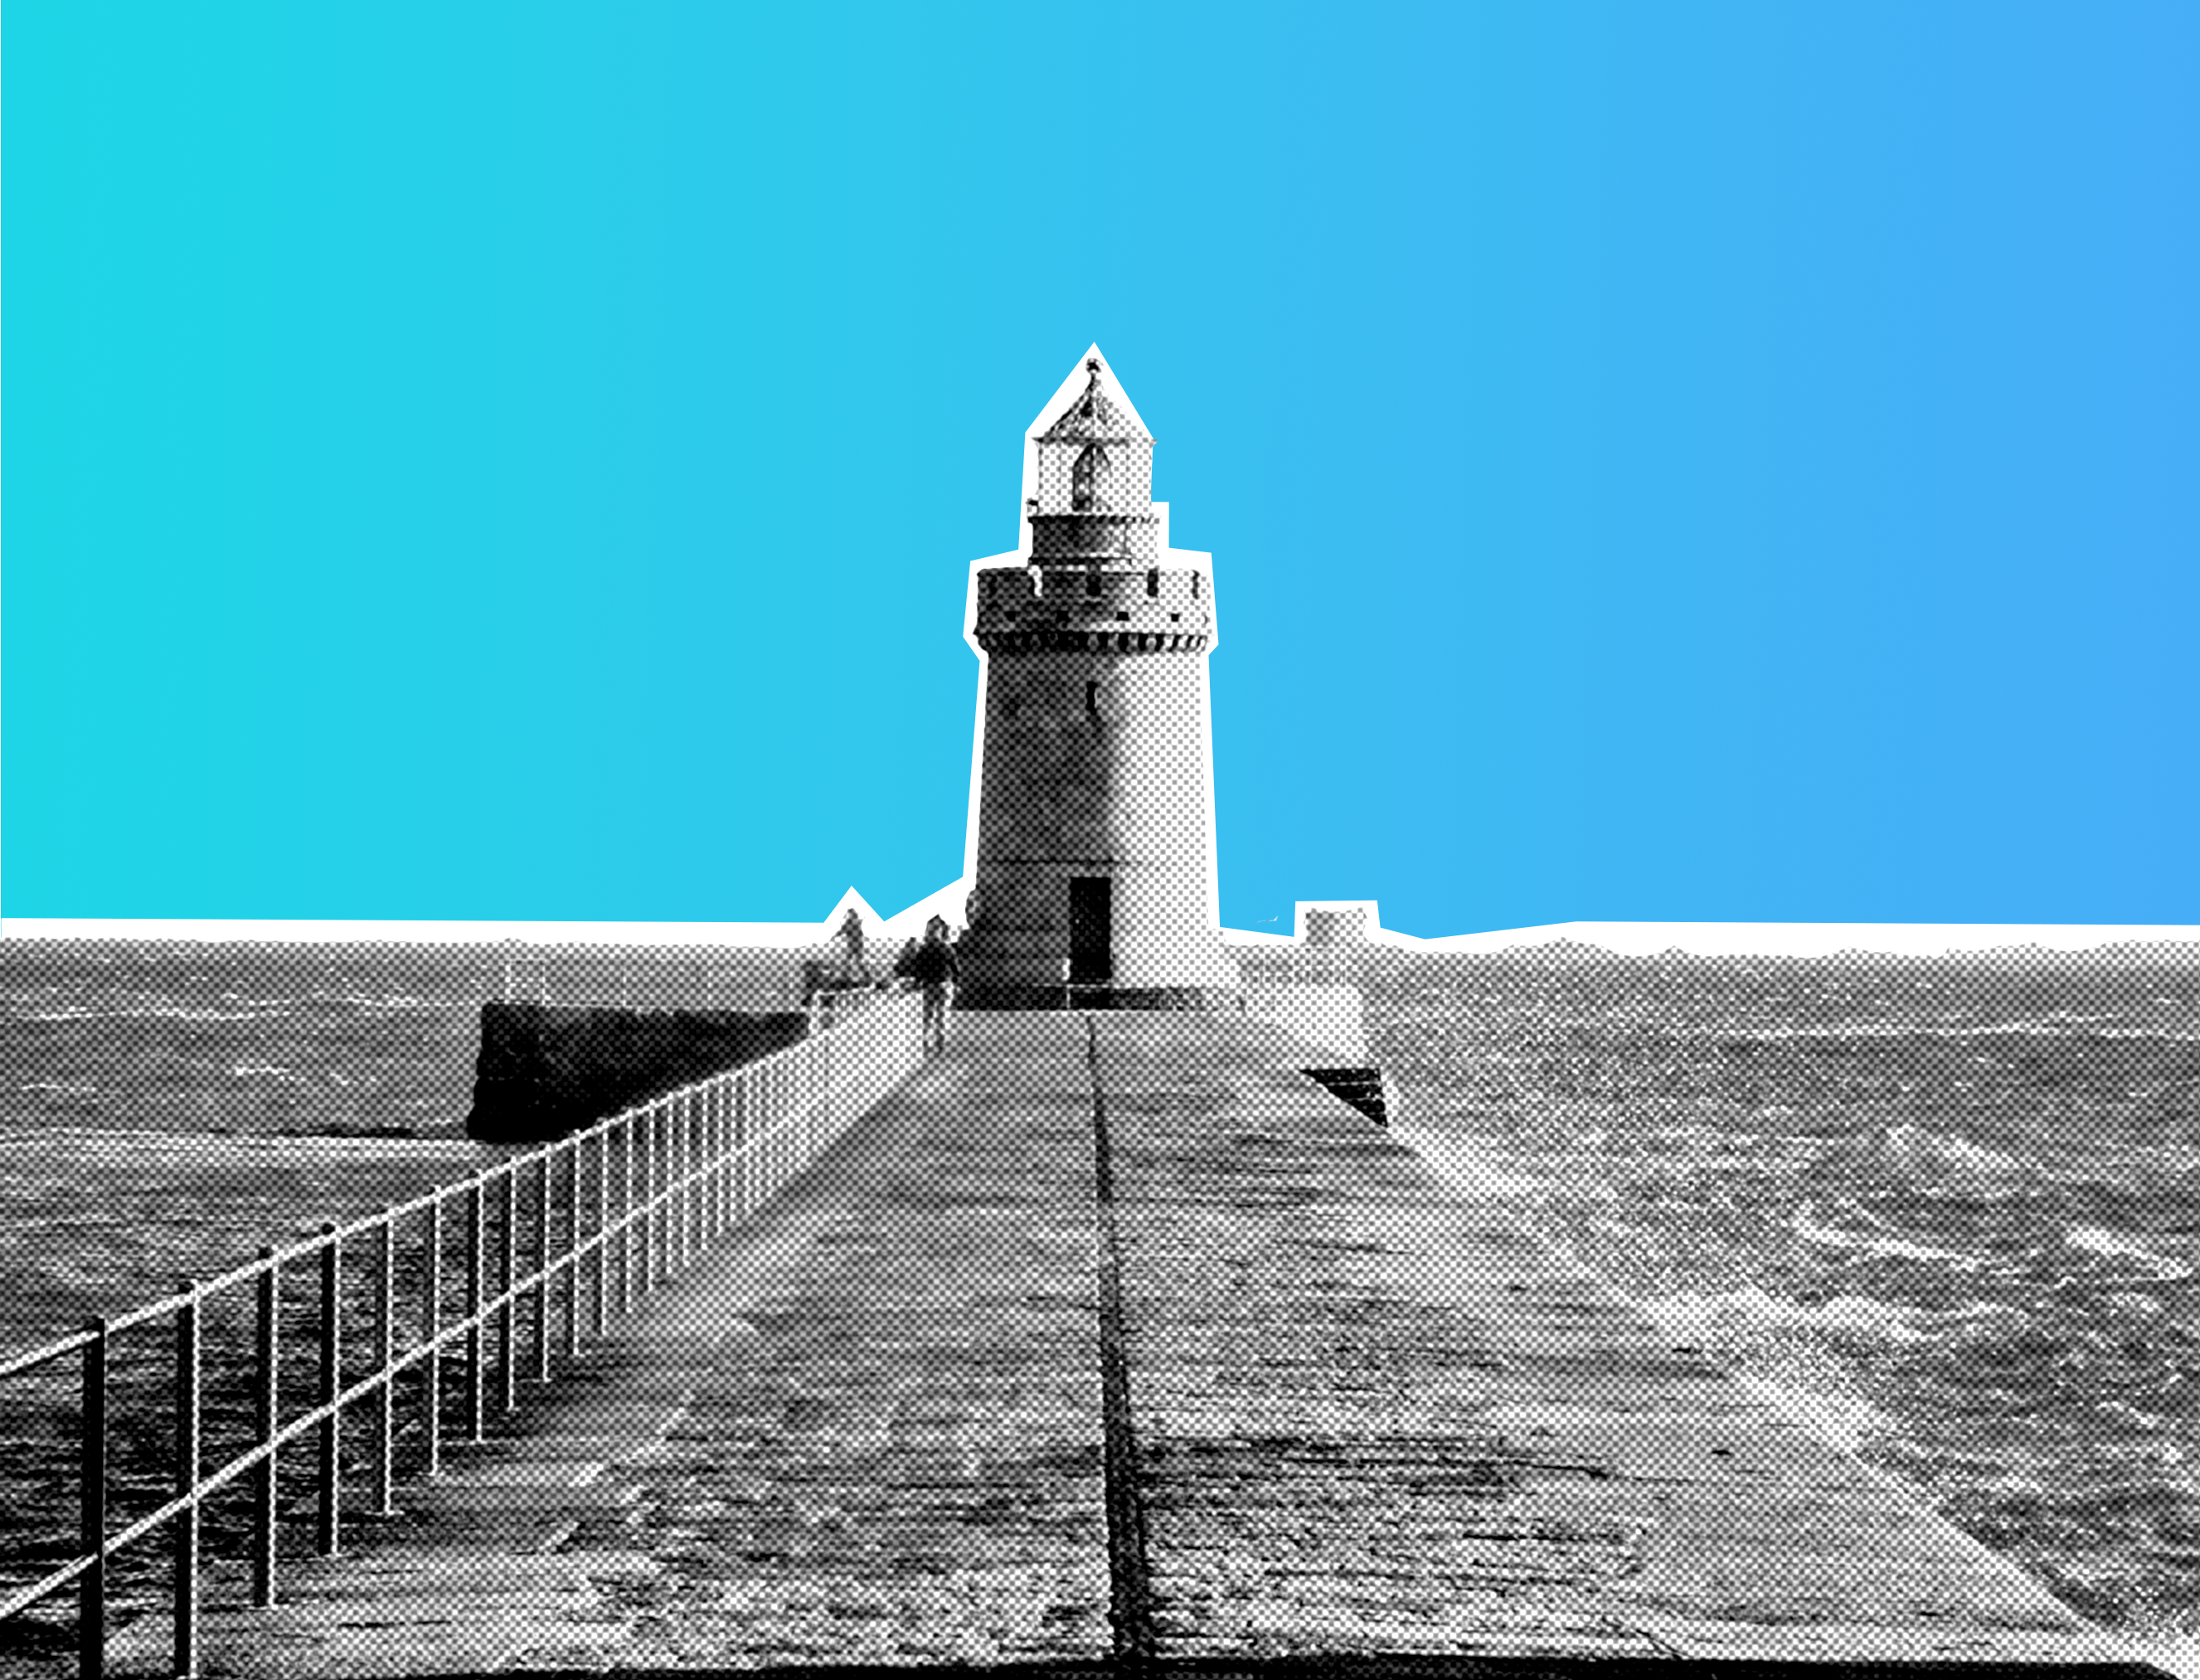 PR and marketing image of lighthouse in Guernsey, Channel Islands